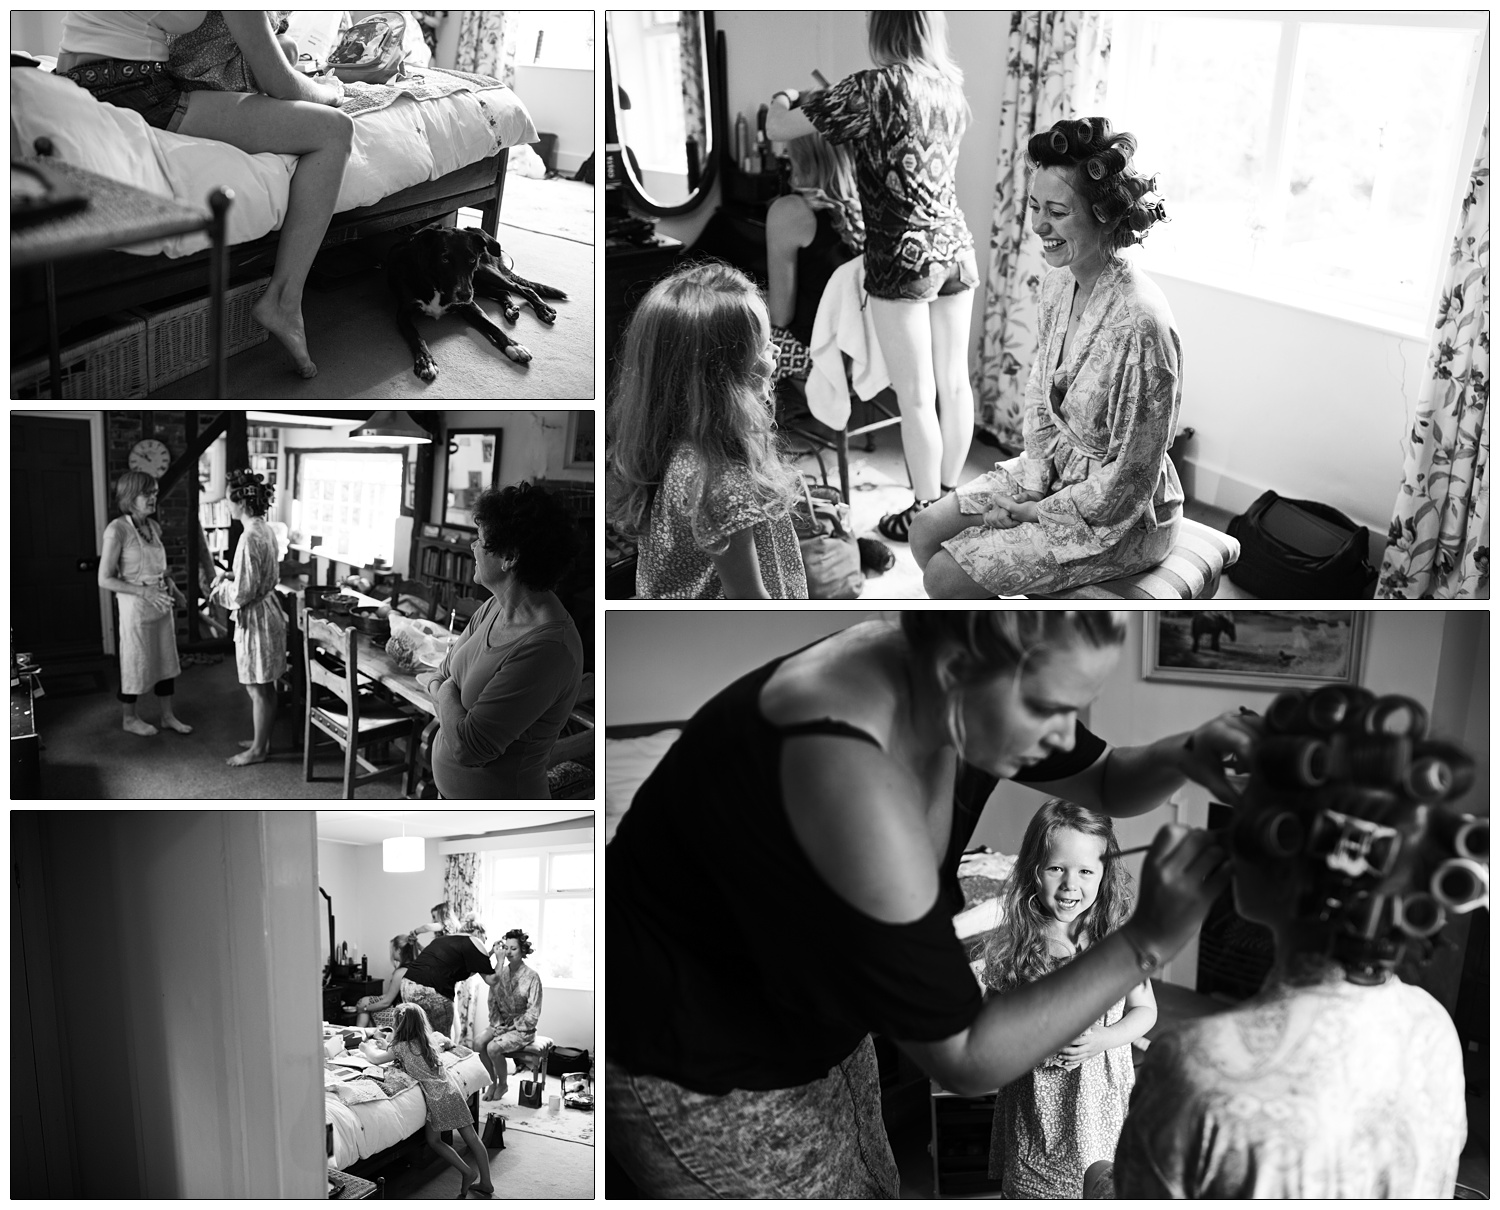 Candid reportage style pictures of wedding preparation at home in Essex. A little girl smiles up at the bride in rollers. A dog is under the bed.